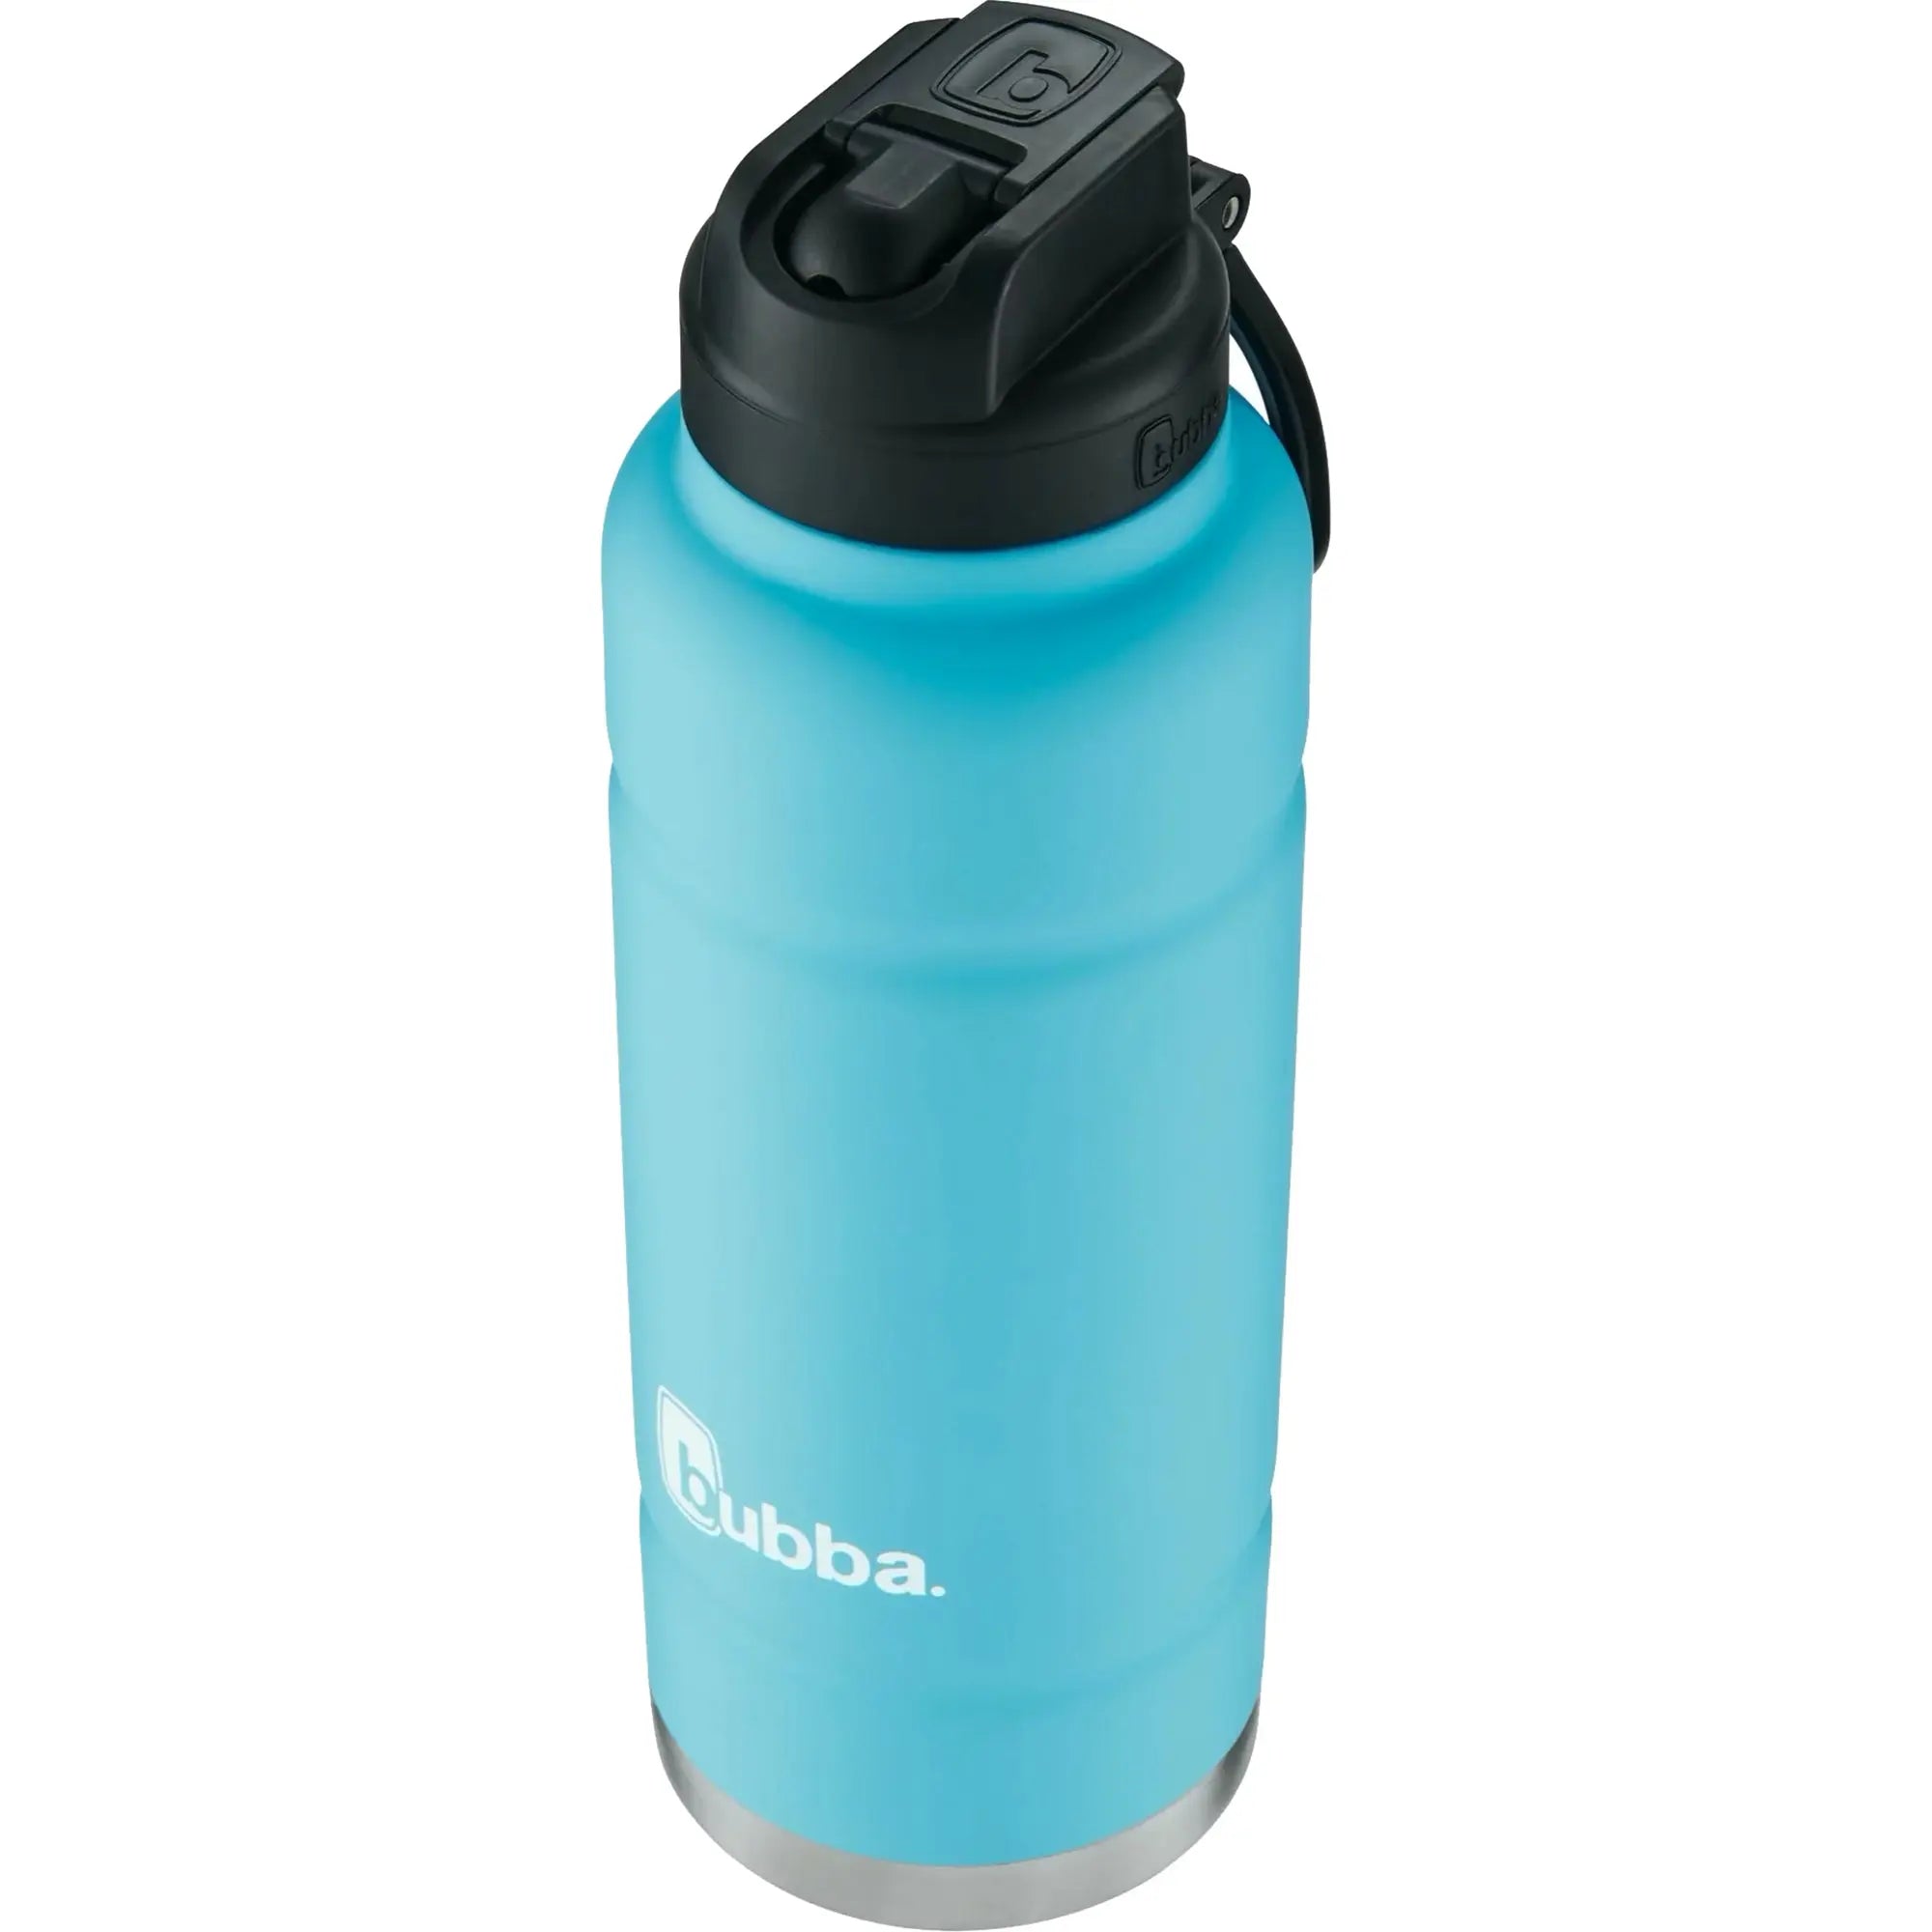 Bubba 40 oz. Trailblazer Insulated Stainless Steel Water Bottle - Island Teal Bubba